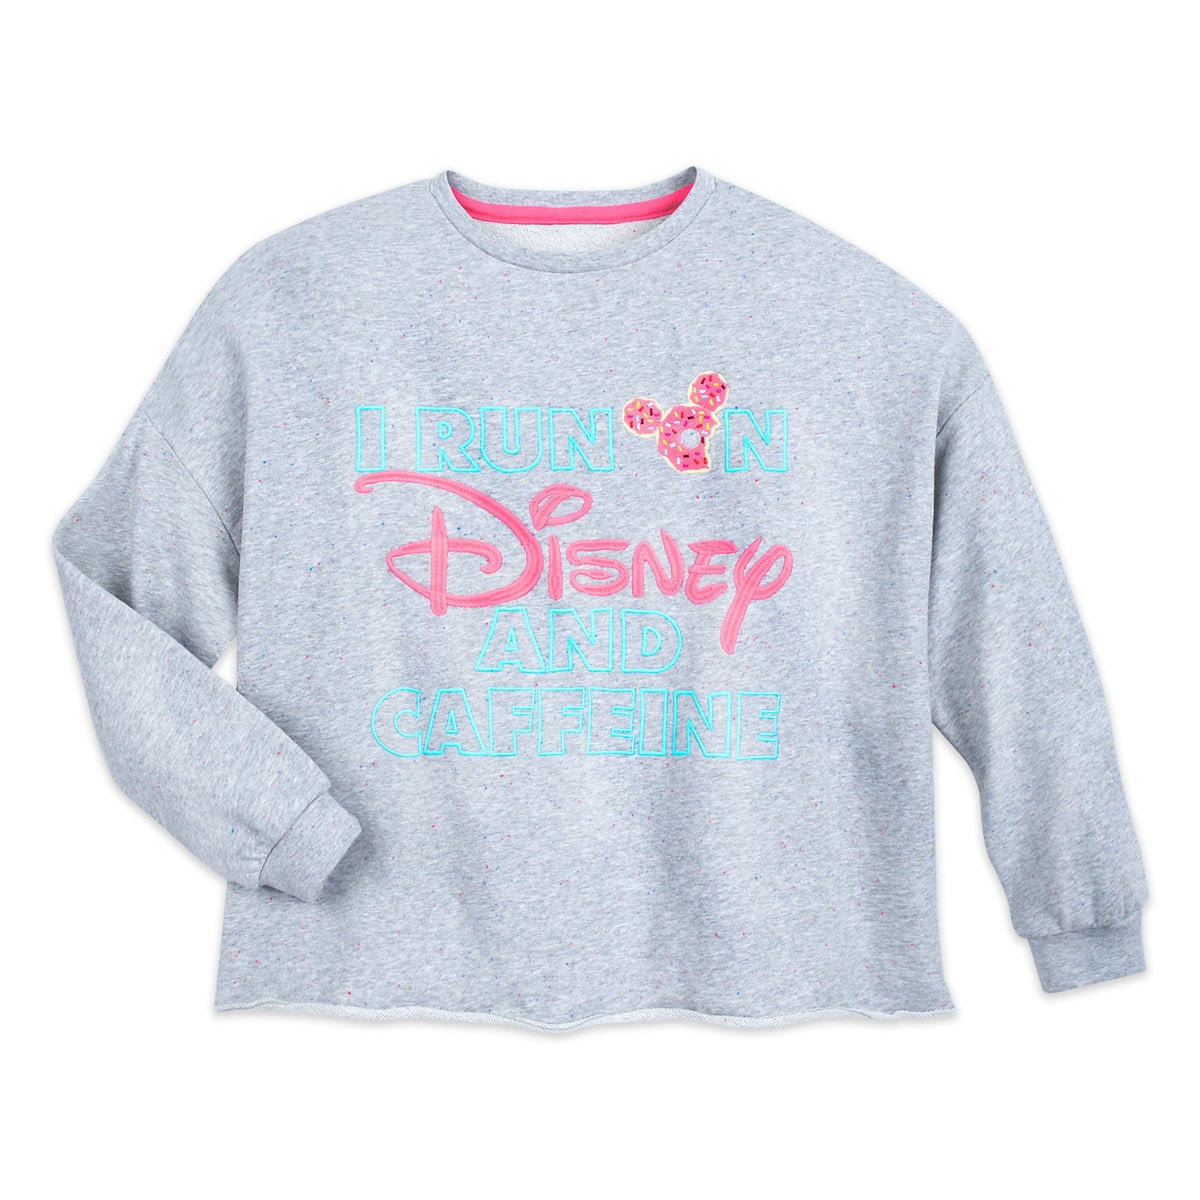 The Sweet Disney Obsessed Collection Is Now On shopDisney